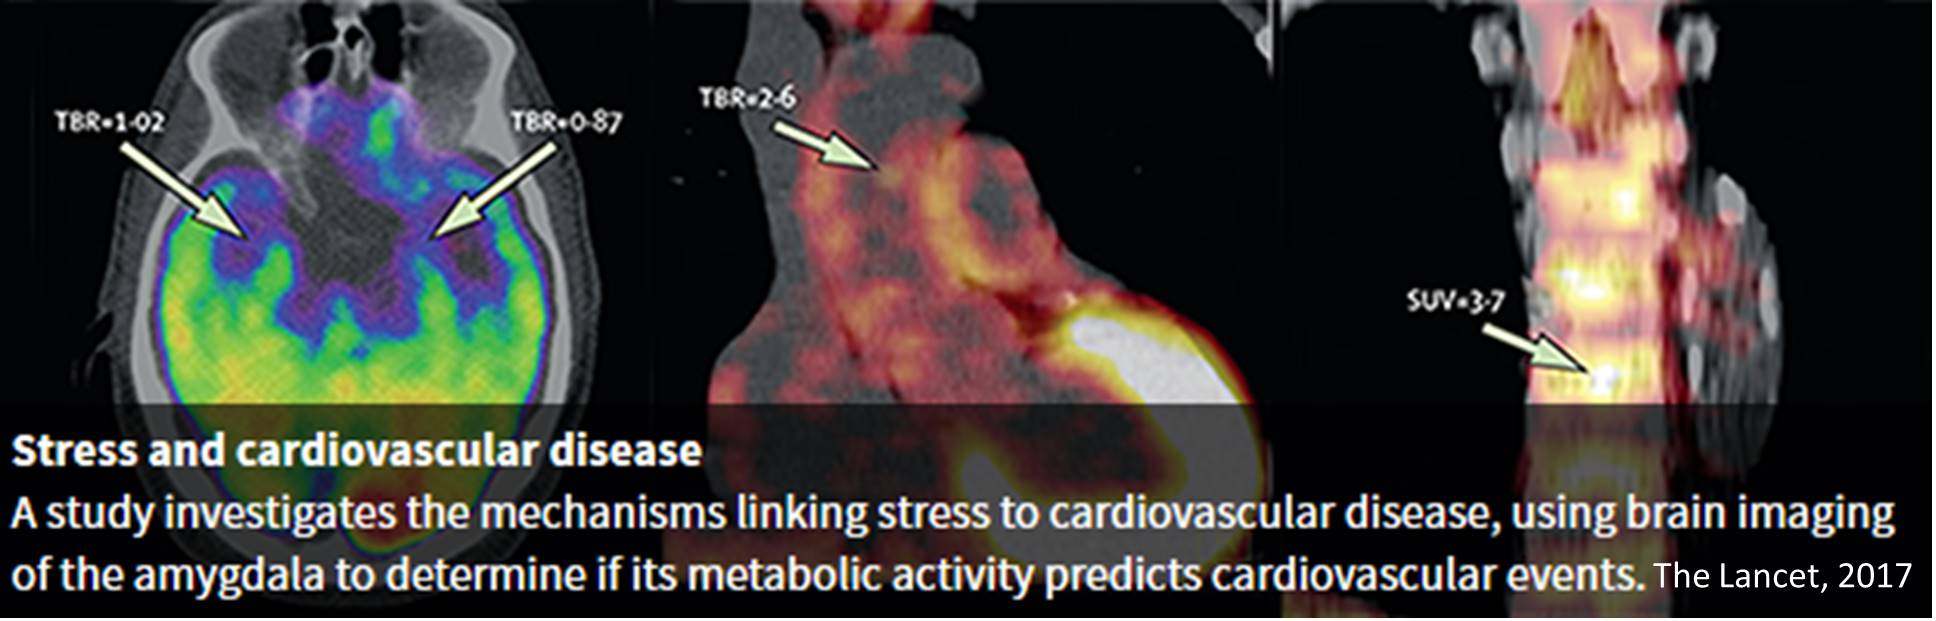 How stress may lead to cardiovascular disease &amp; stroke